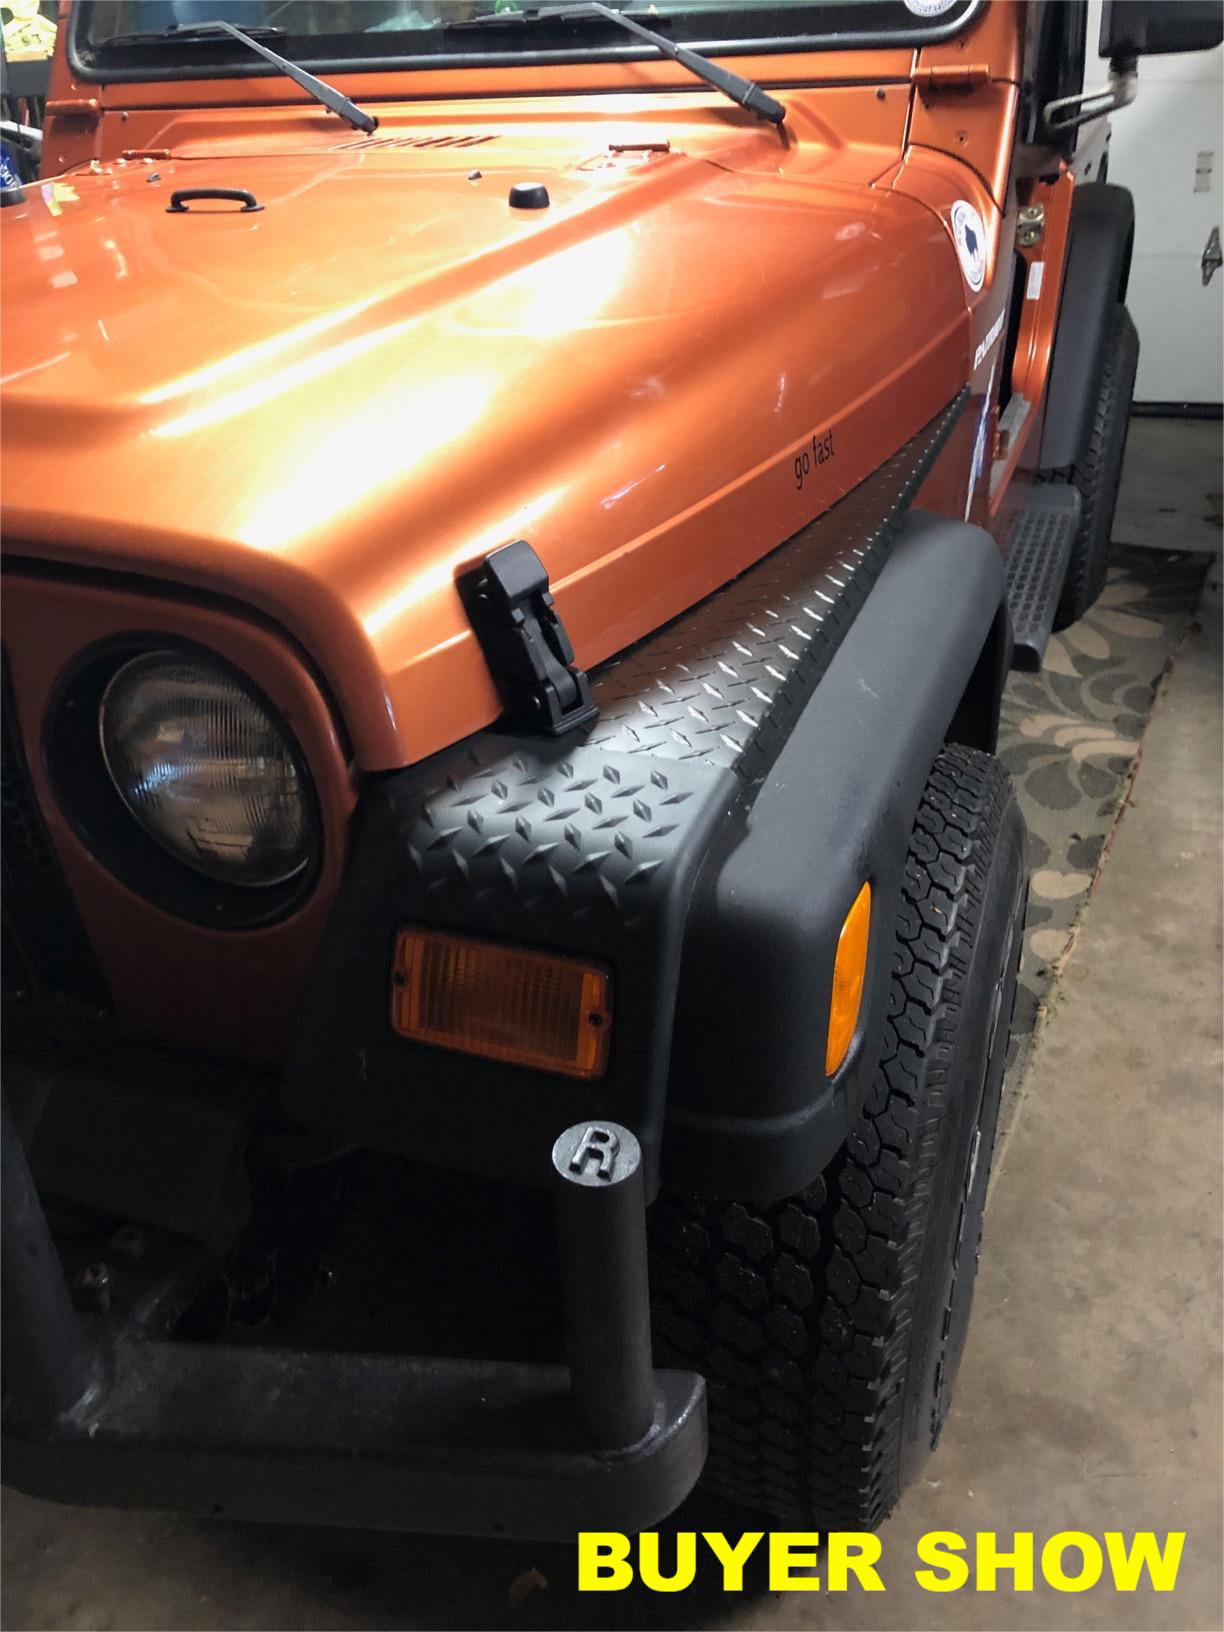 ECOTRIC Fender Bug Chip Guards Front Body Armor Black Diamond Textured Plate 11650.20 for Jeep TJ Wrangler 97-06 